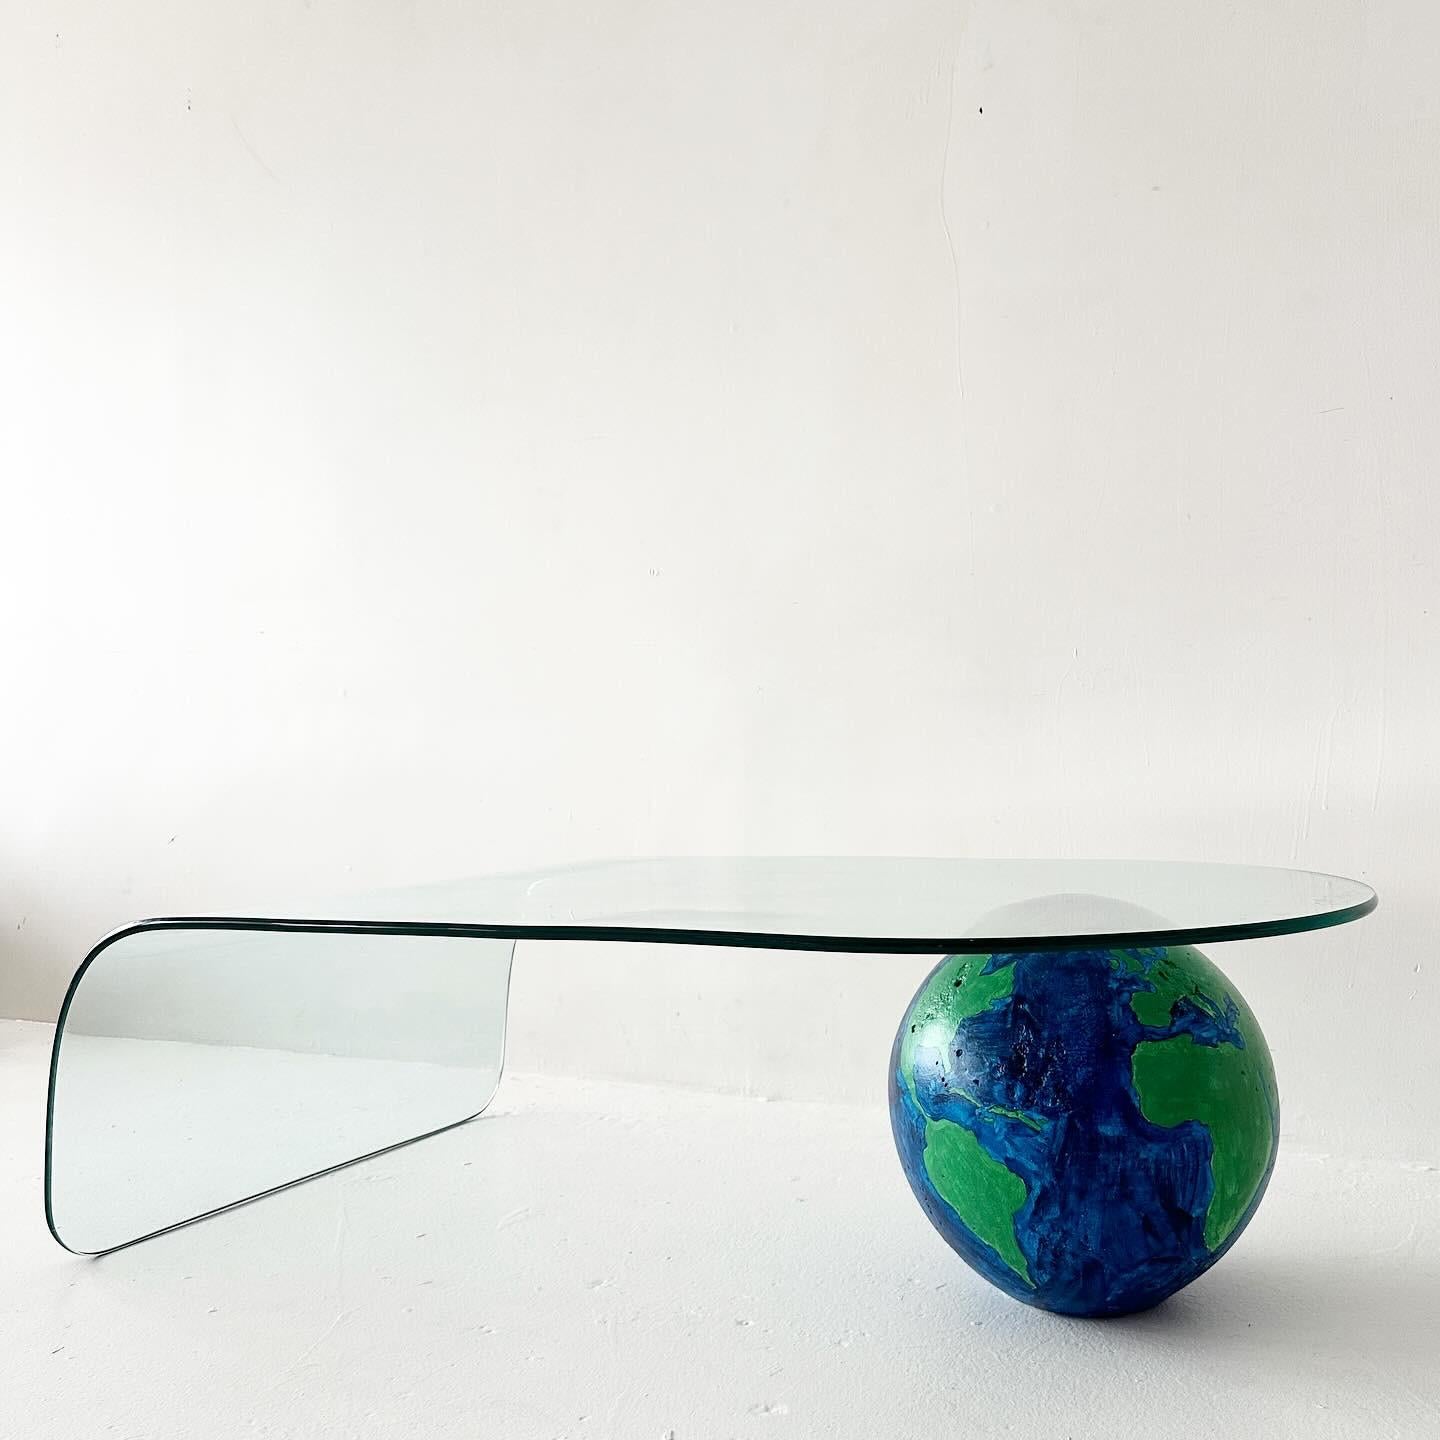 vintage waterfall glass coffee table with plaster sphere counterbalance base that has been painted like a globe